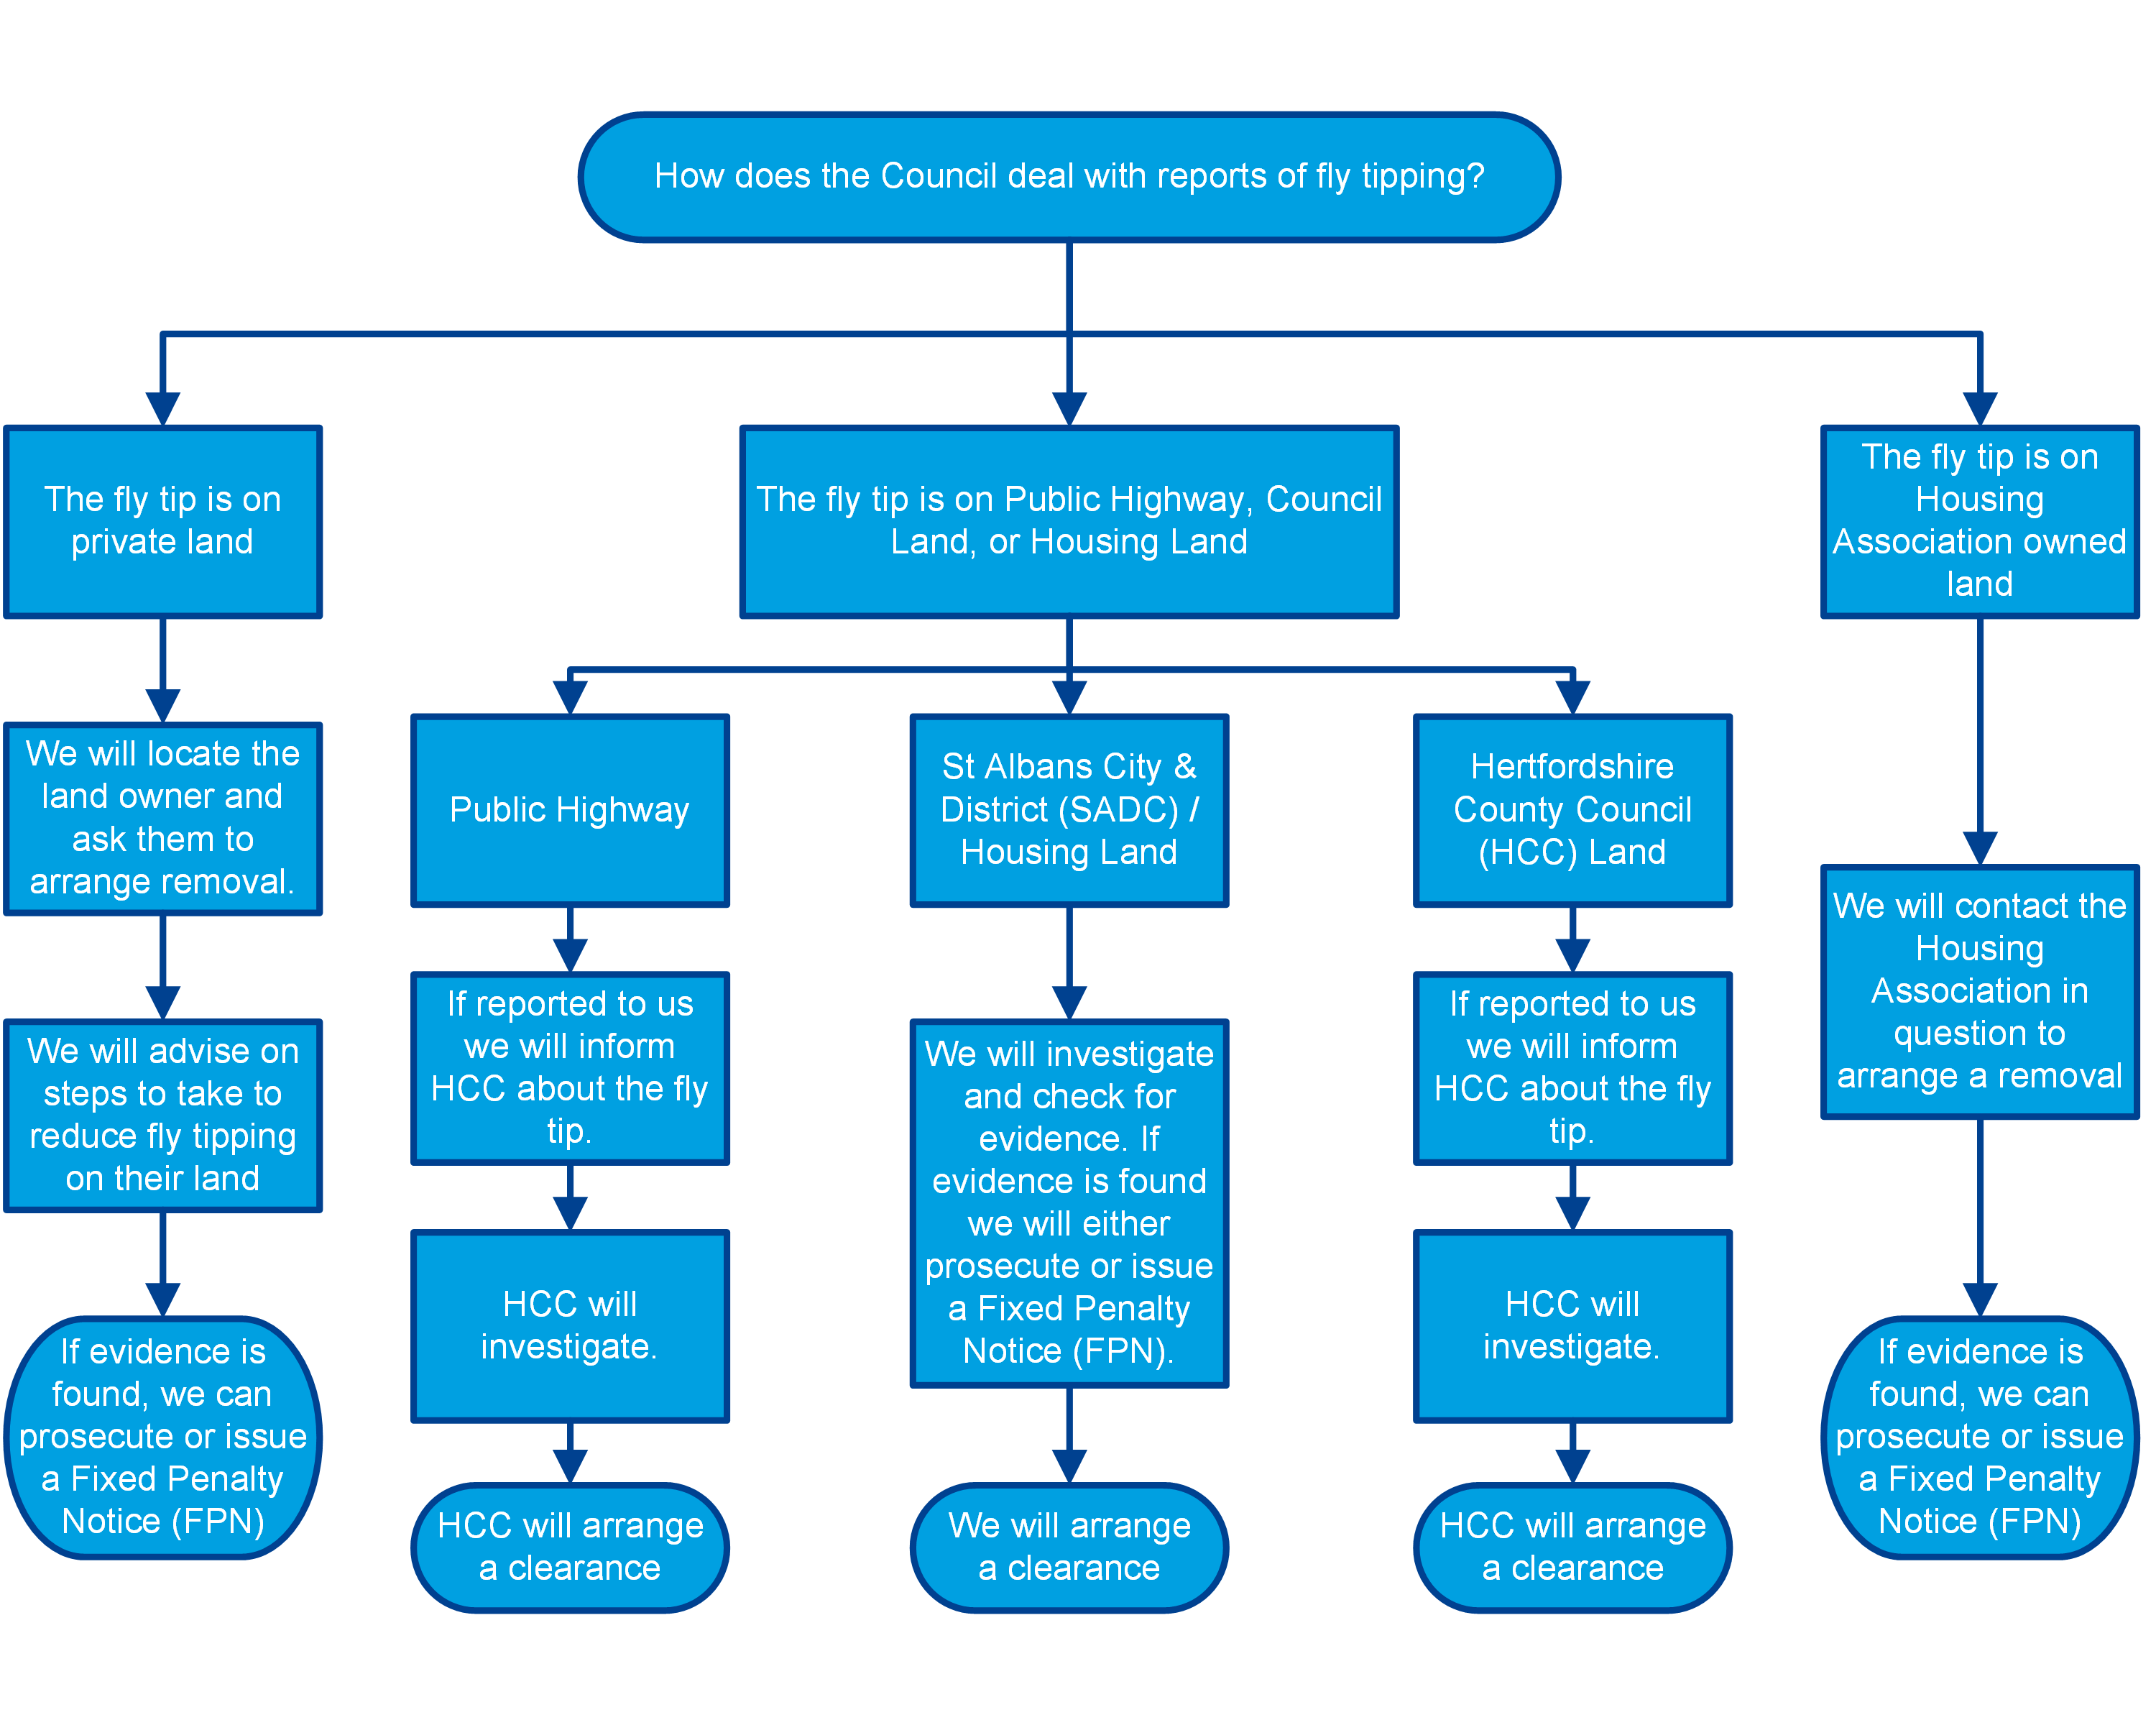 A flowchart of what happens when fly tipping is reported to the Council